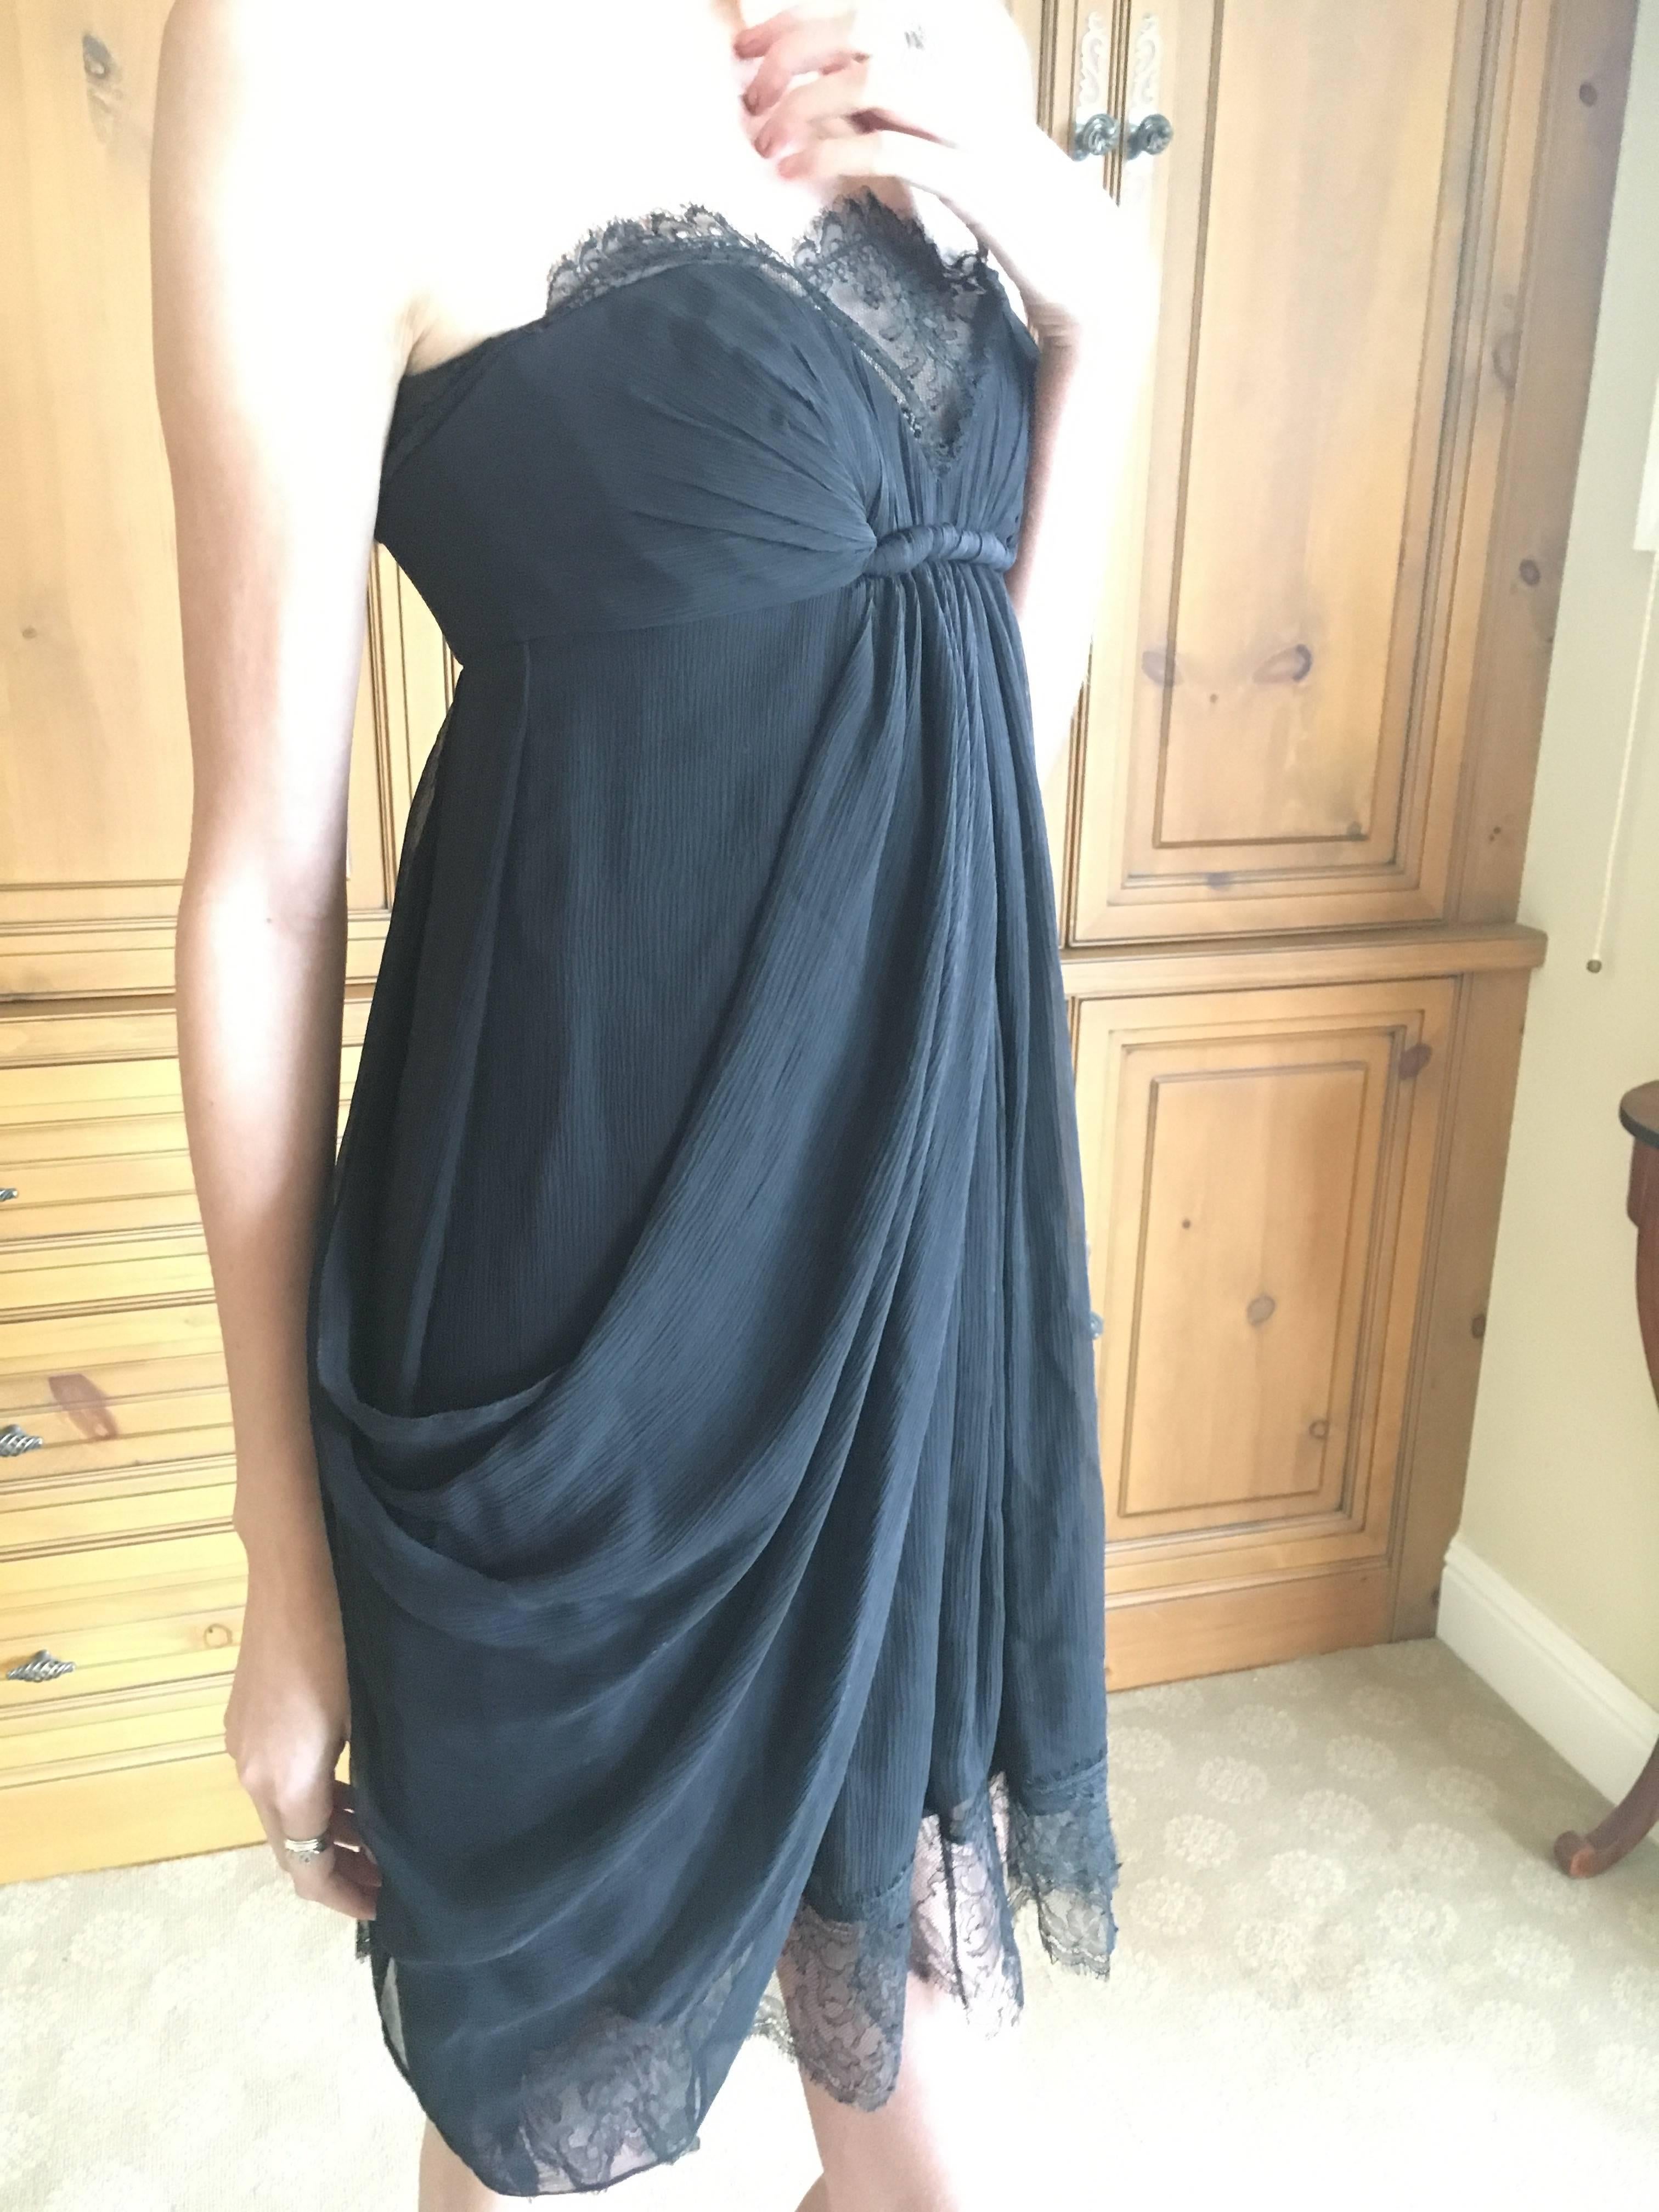 Exquisite little black dress from Oscar de la Renta for Bergdorf Goodman.
Strapless with a sweetheart bustling, trimmed in lace, this has a full corset interior.
Size 2
Bust 34"
Was it 26"
Hips 46"
Length 32"
Excellent condition